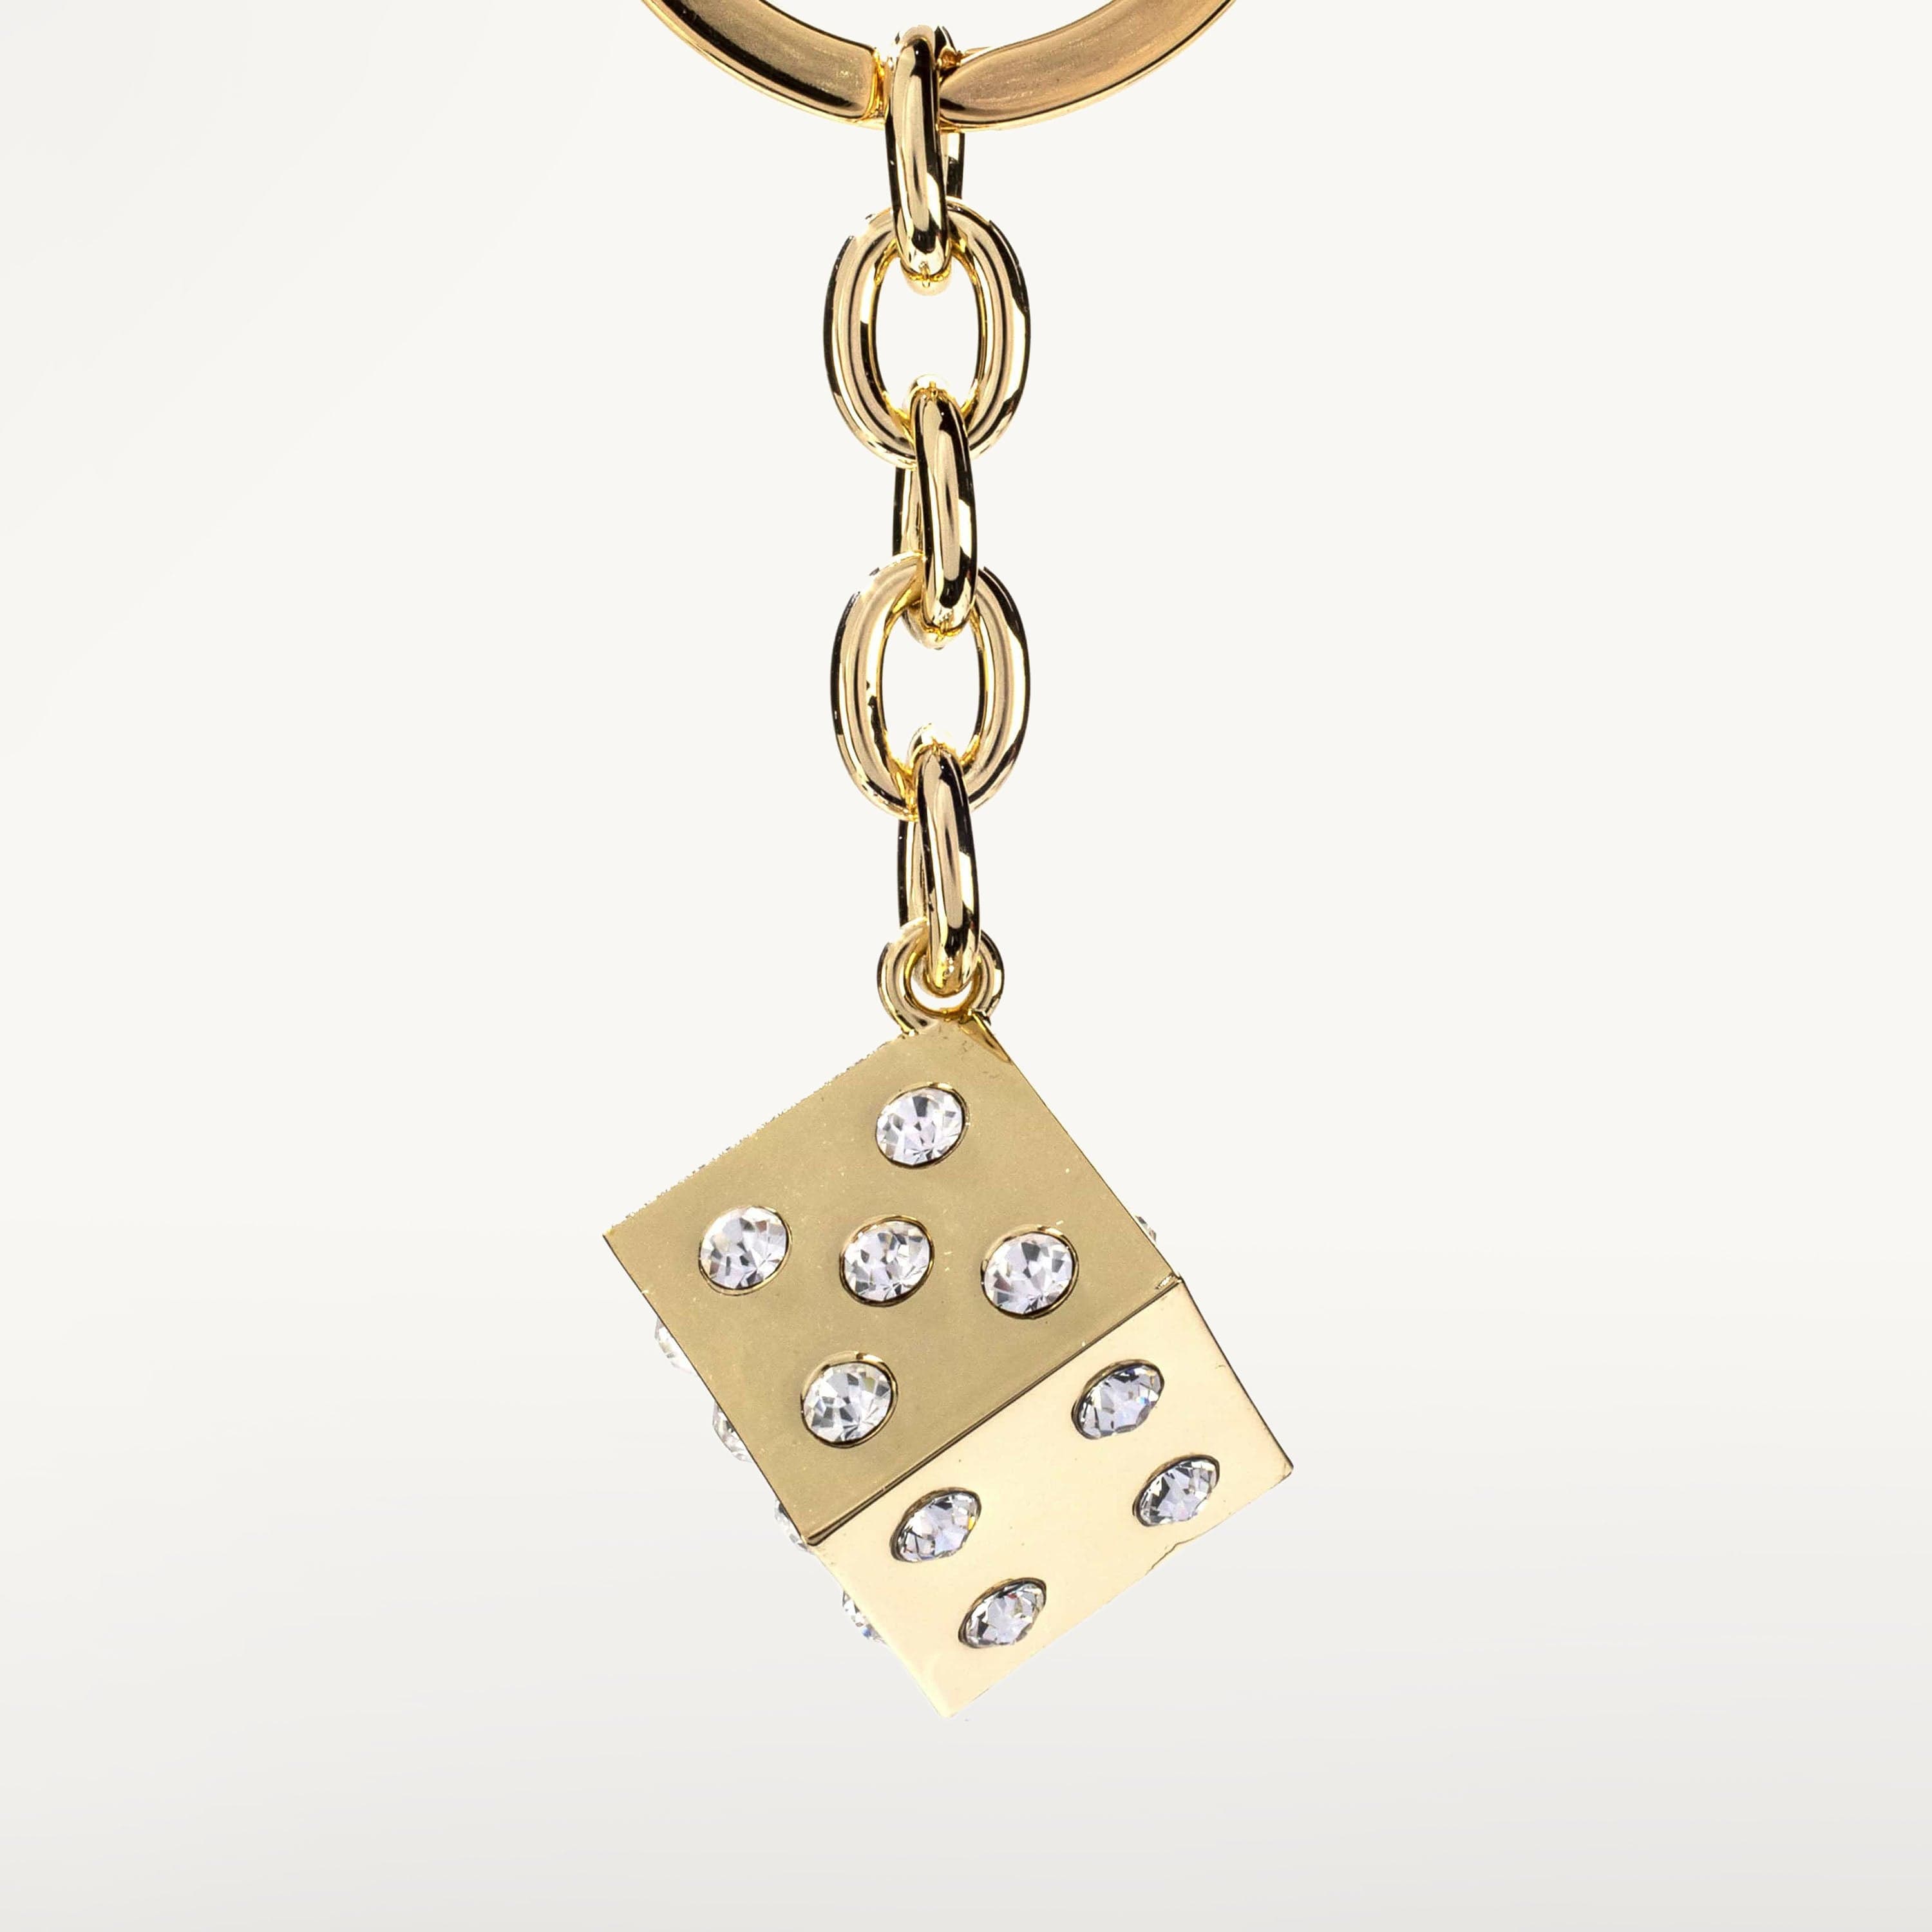 Kalifano Crystal Keychains White Dice with Gold Keychain made with Swarovski Crystals SKC-133